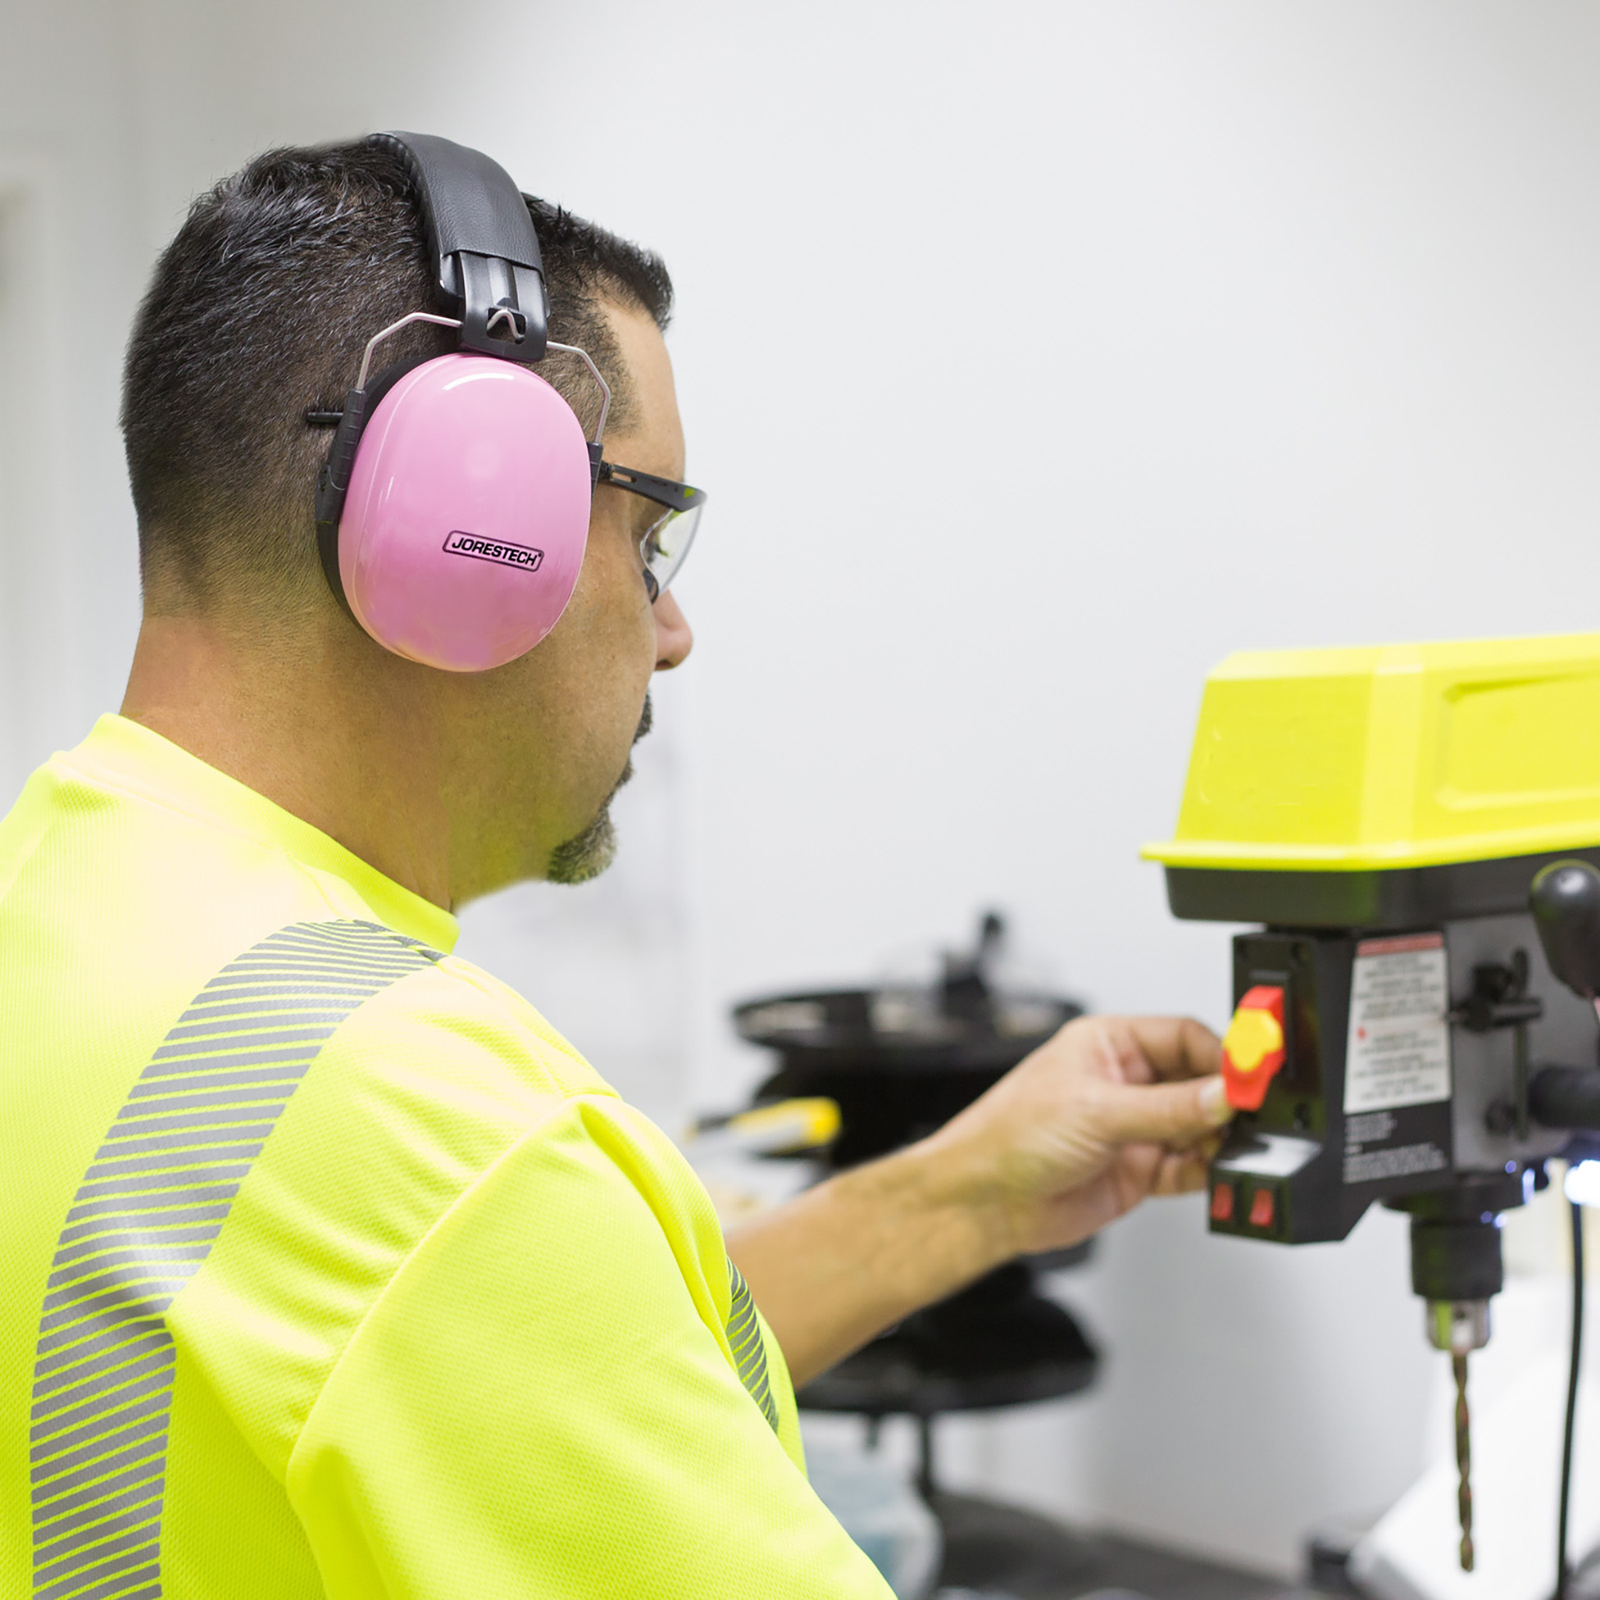 Man using the Noise reduction earmuffs while operation a loud power machine